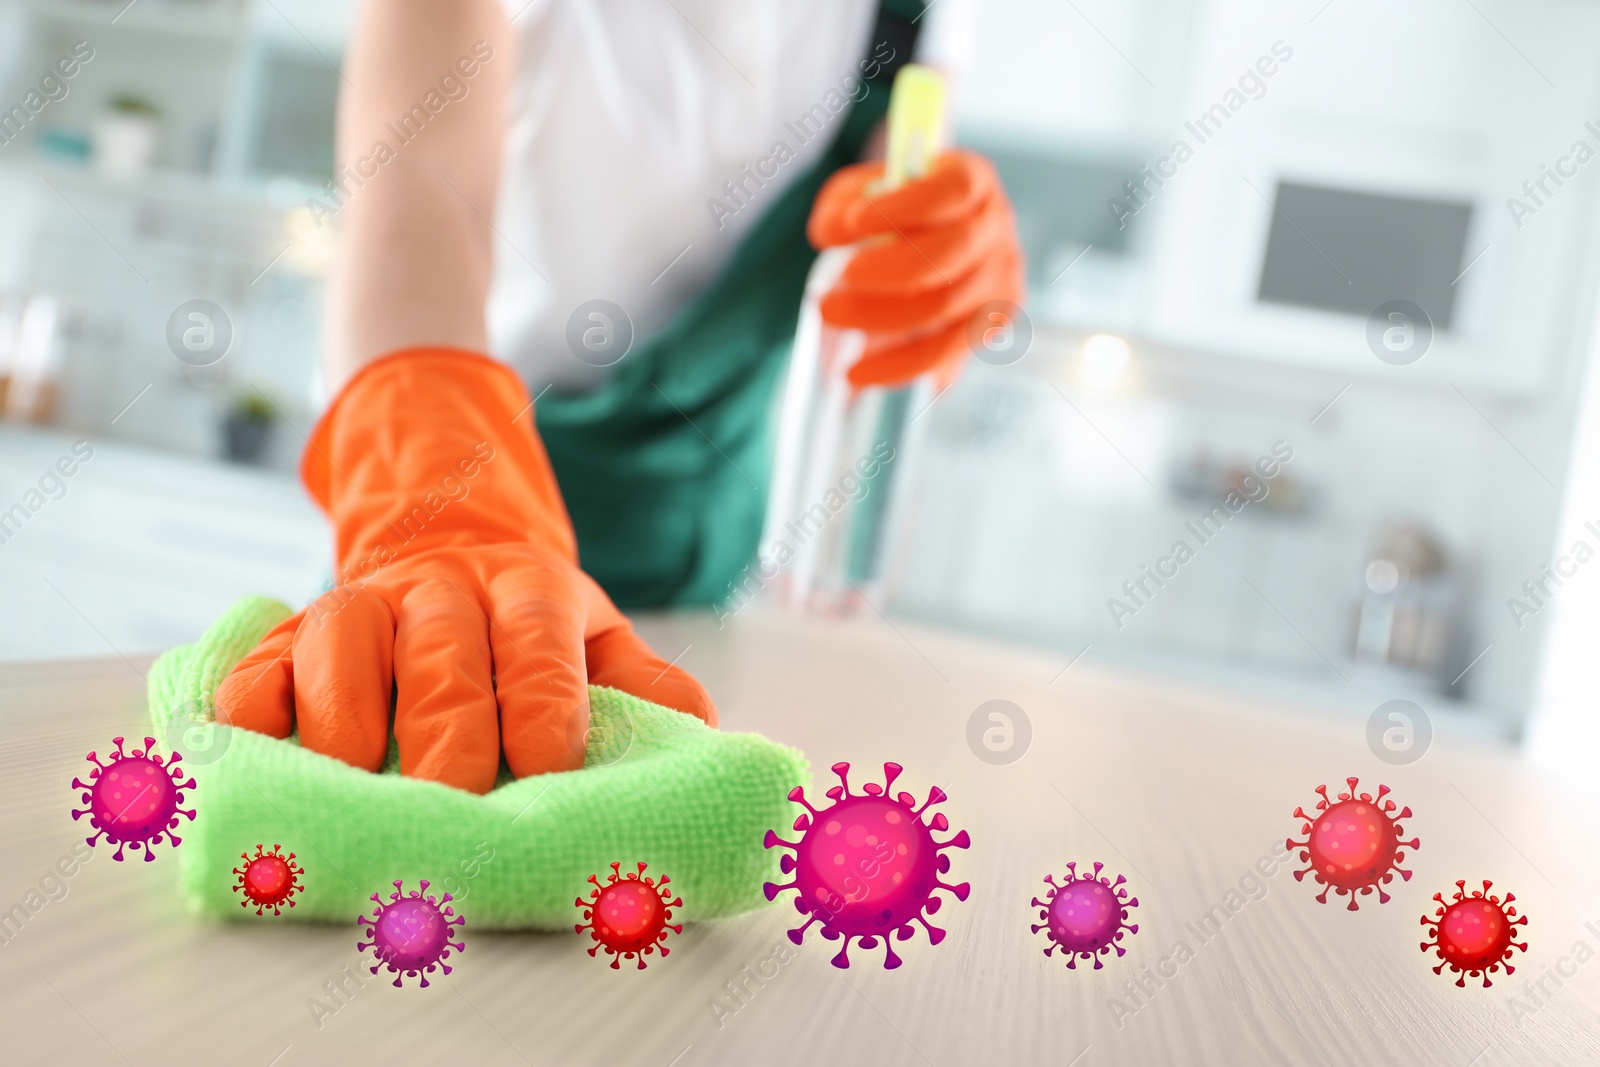 Image of Cleaning vs viruses. Woman washing table with sponge and disinfecting solution